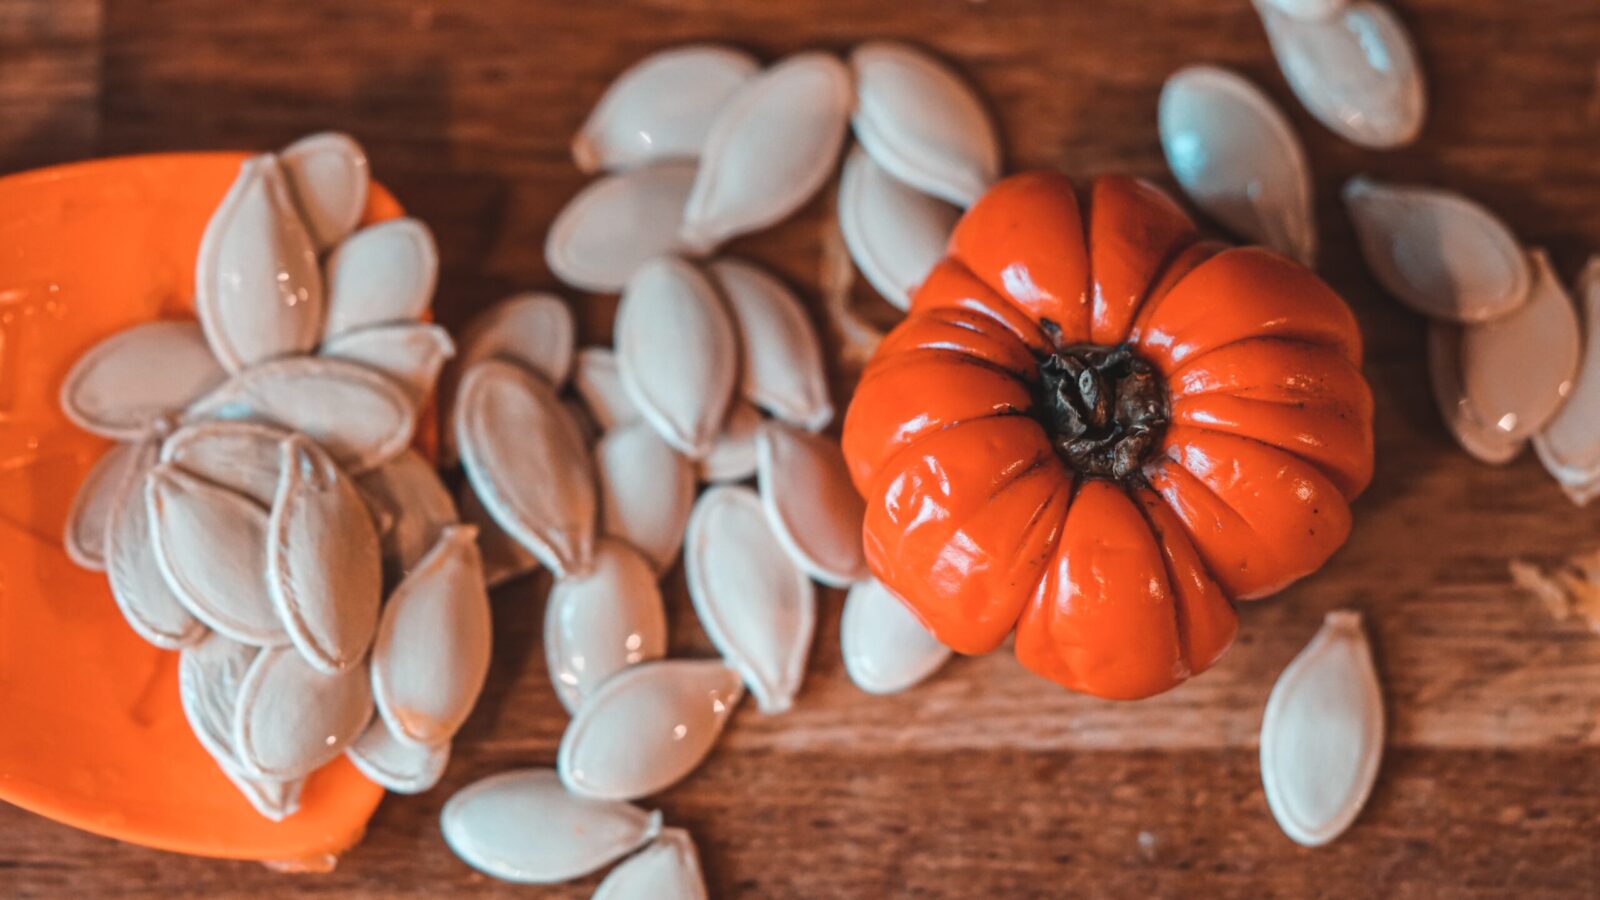 How to Clean Pumpkin Seeds & What are the Benefits of Pumpkin Seeds?